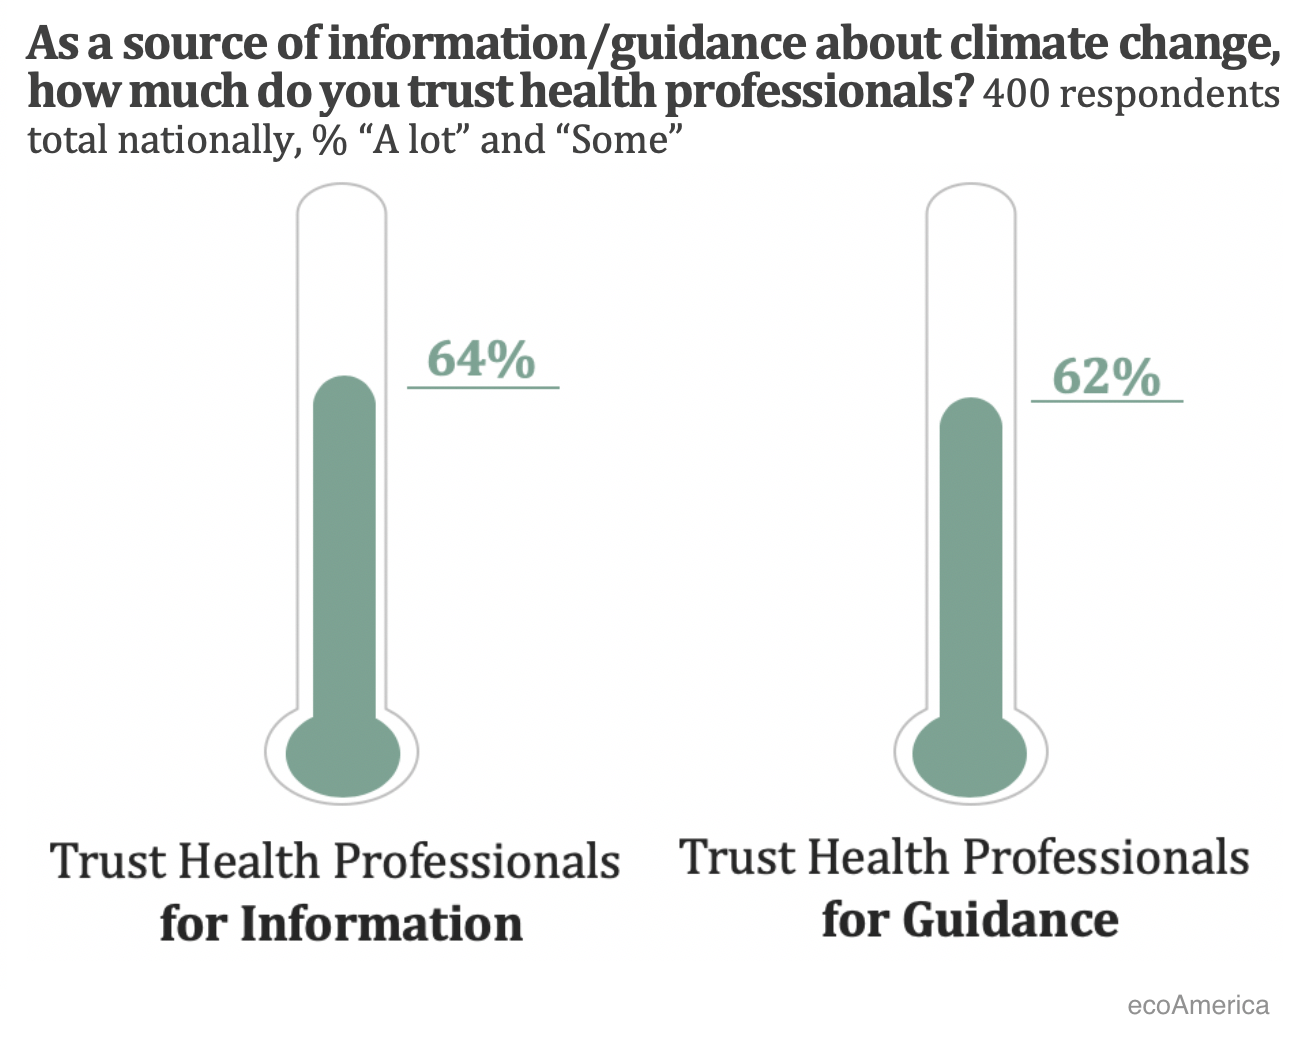 Americans Trust Health Professionals for Information and Guidance on Climate Change